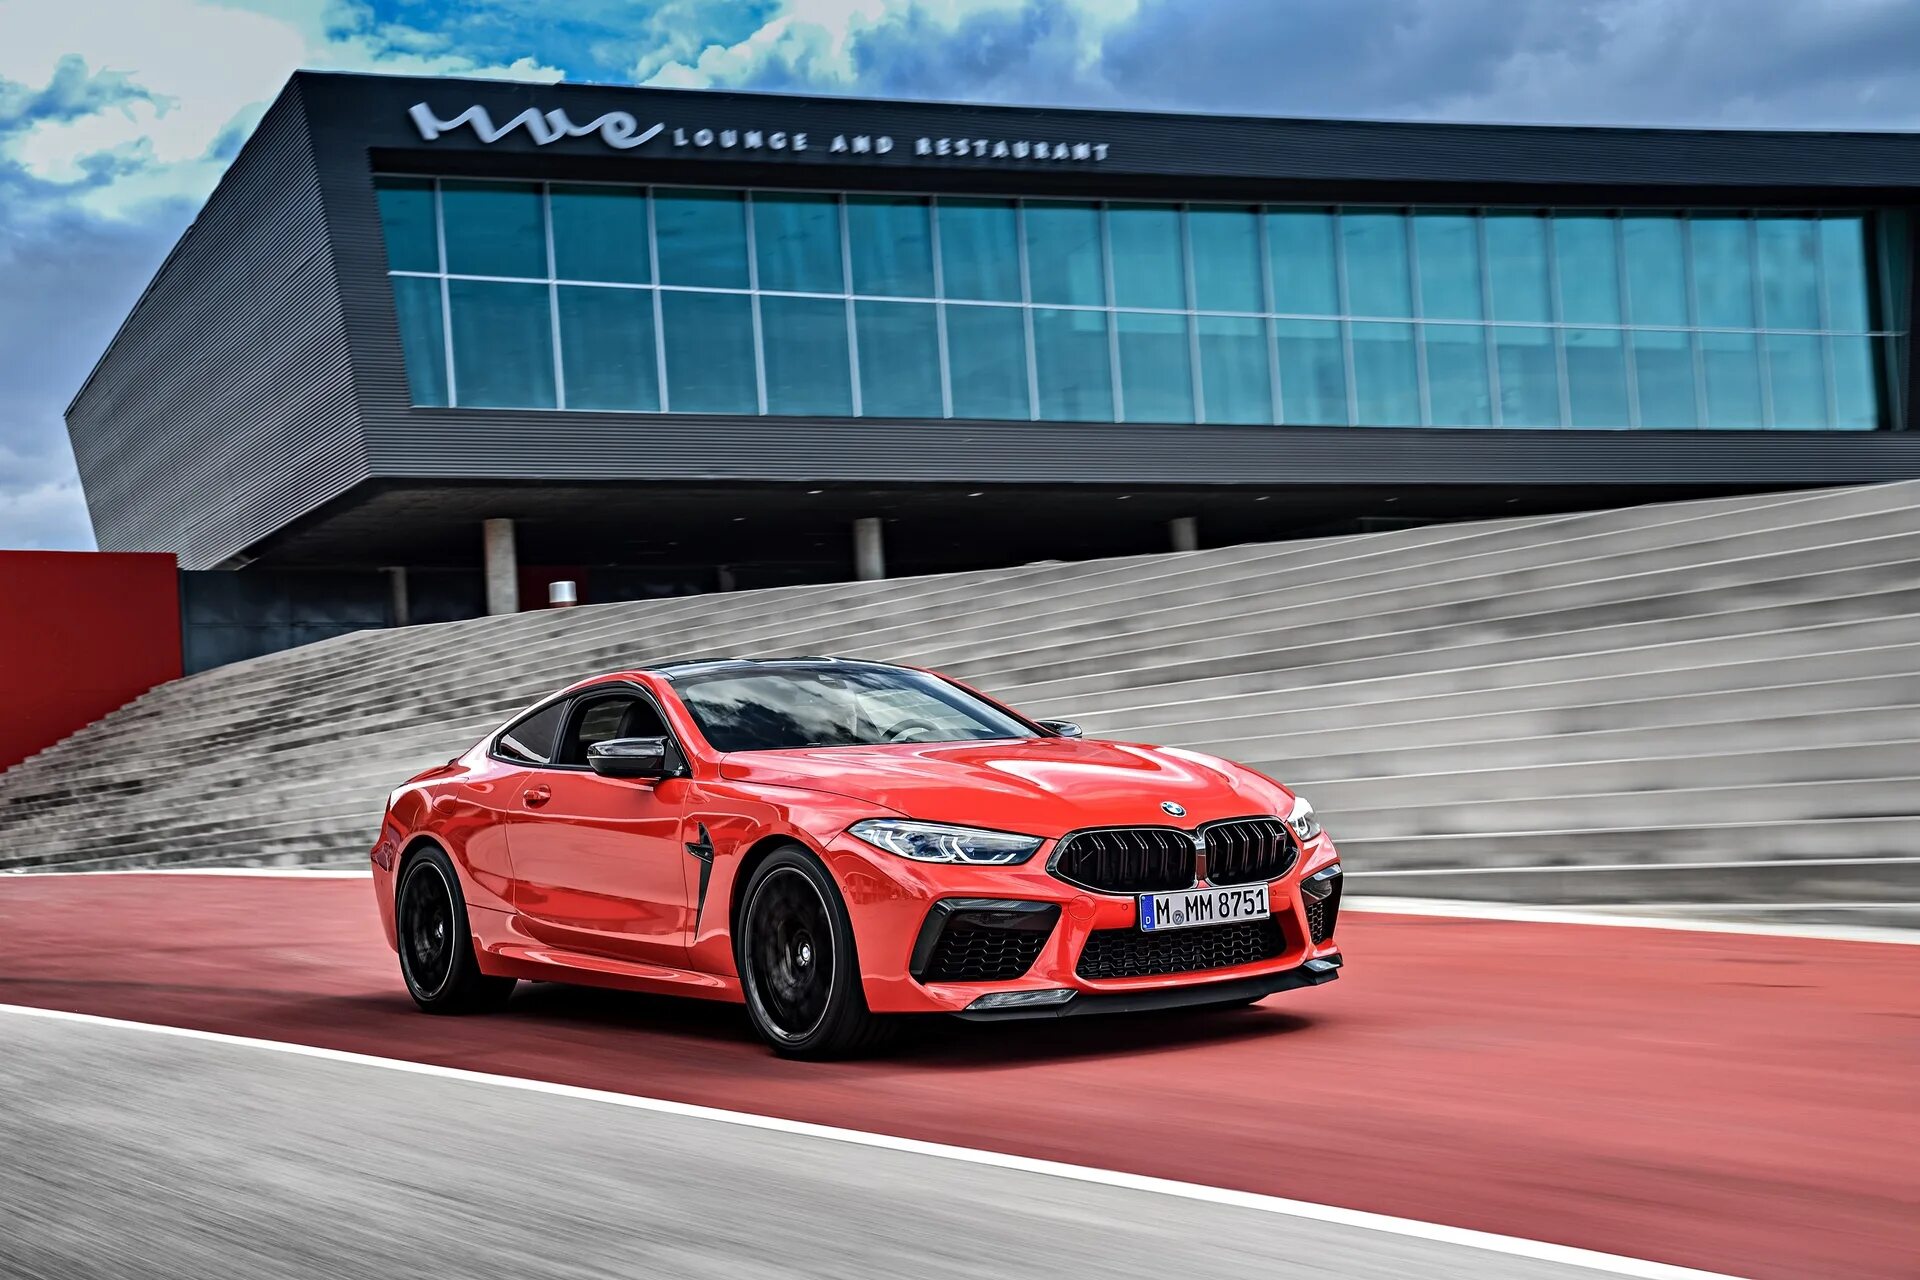 БМВ м8 Компетишн 2021. BMW m8. BMW m8 Competition Coupe. BMW m8 Red. Bmw 8 competition